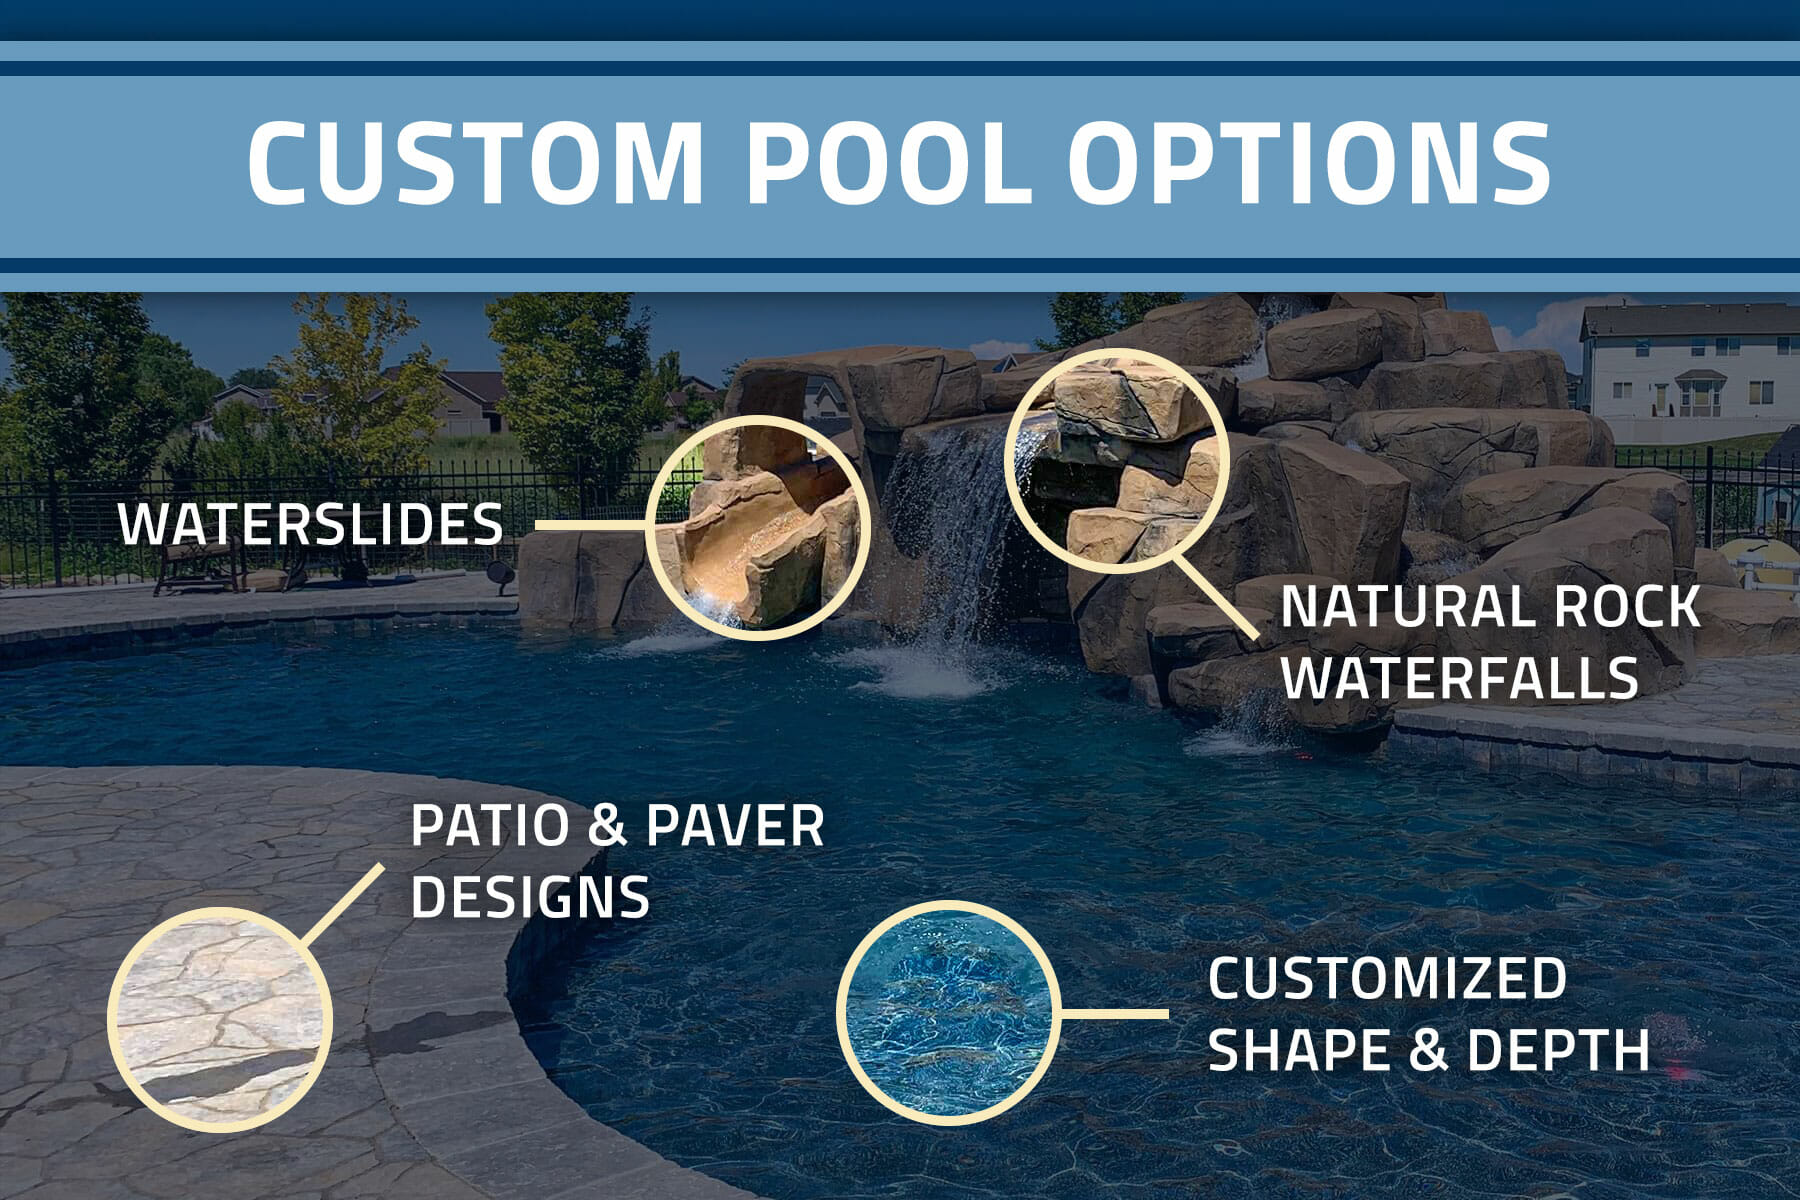 Custom pool options - waterslides - patio paver - natural rock waterfalls - customized pool shape and depth